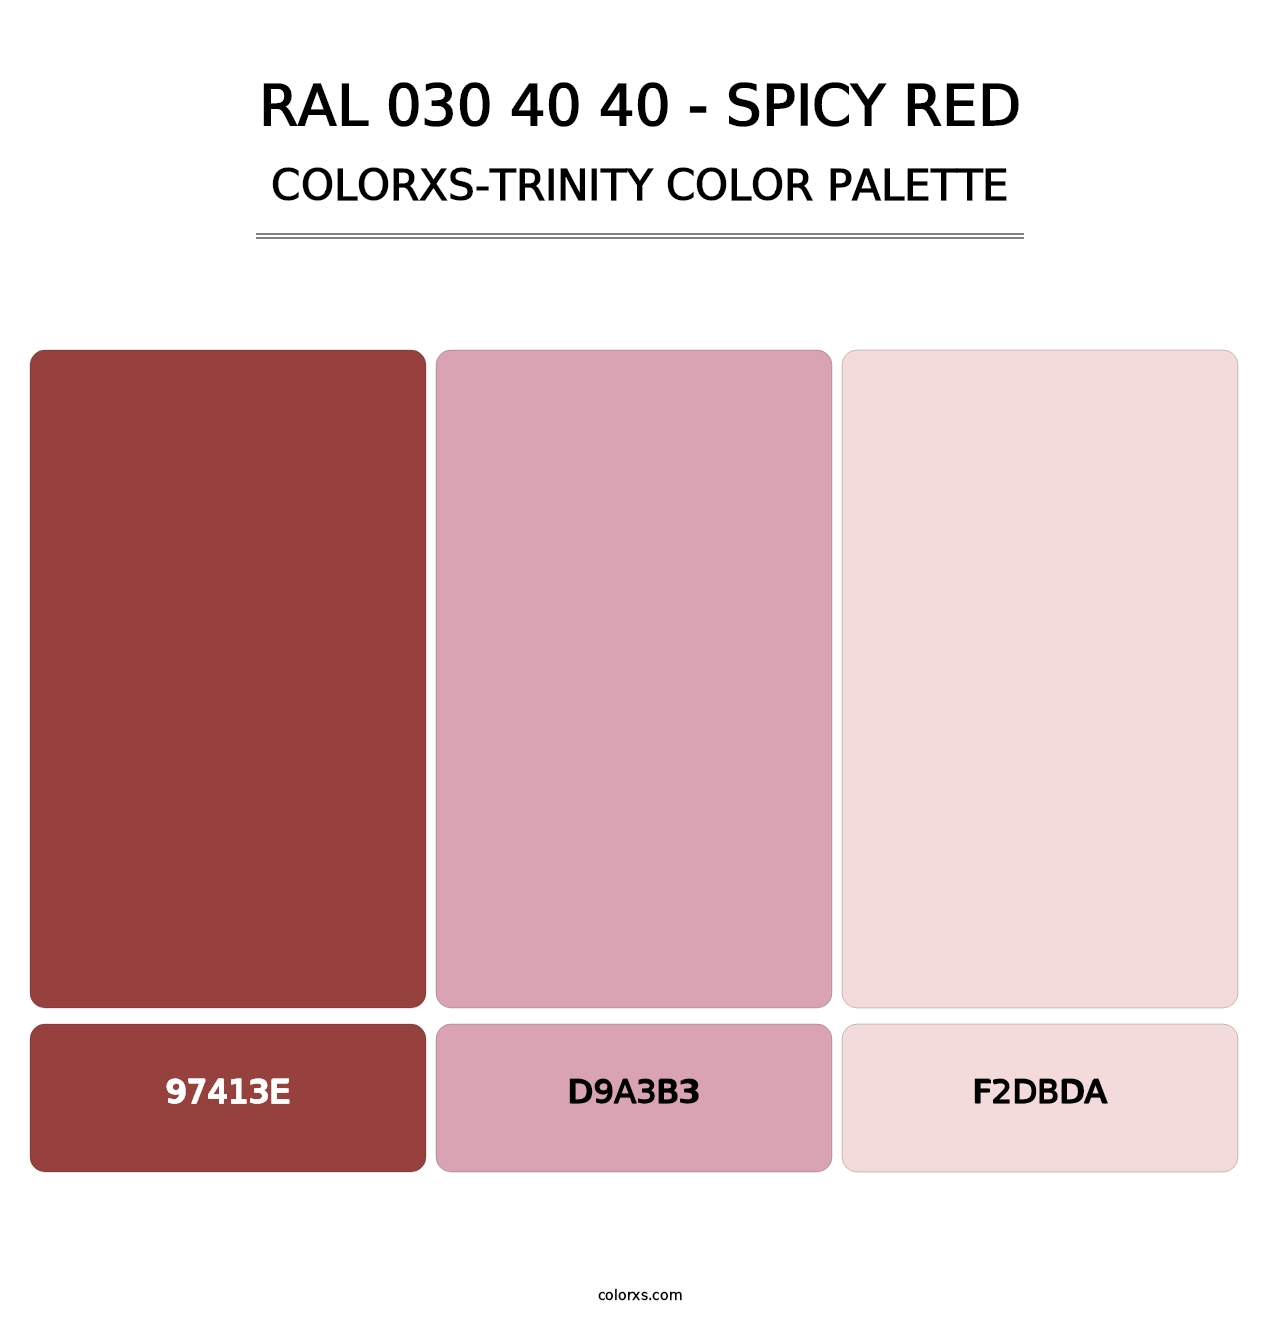 RAL 030 40 40 - Spicy Red - Colorxs Trinity Palette